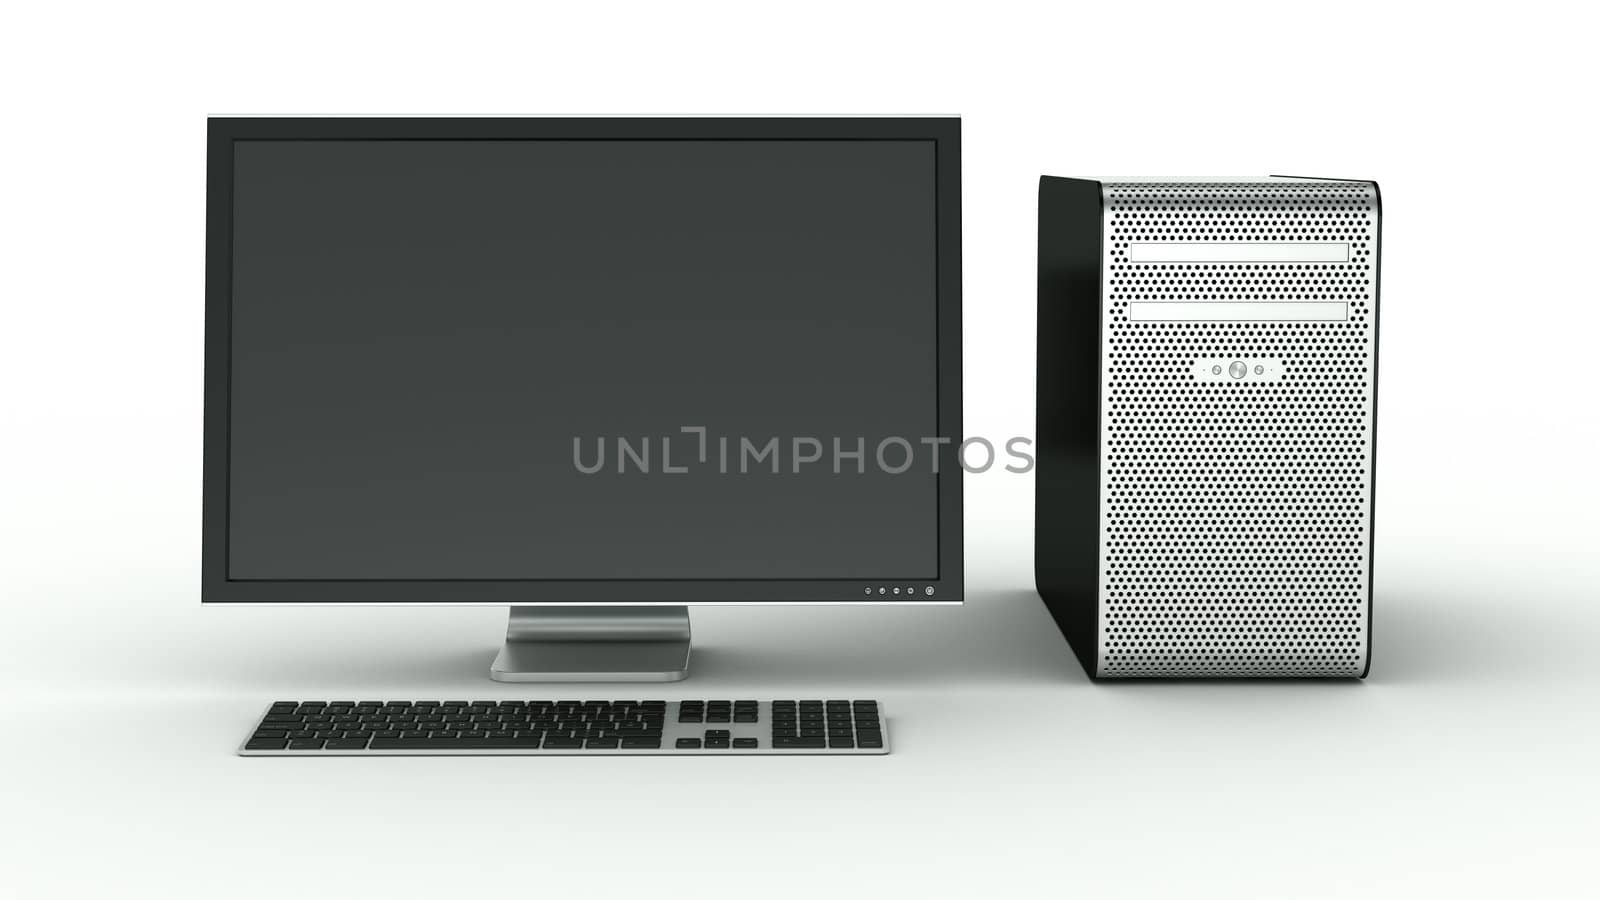 3d rendering of a stylish computer in black plastic